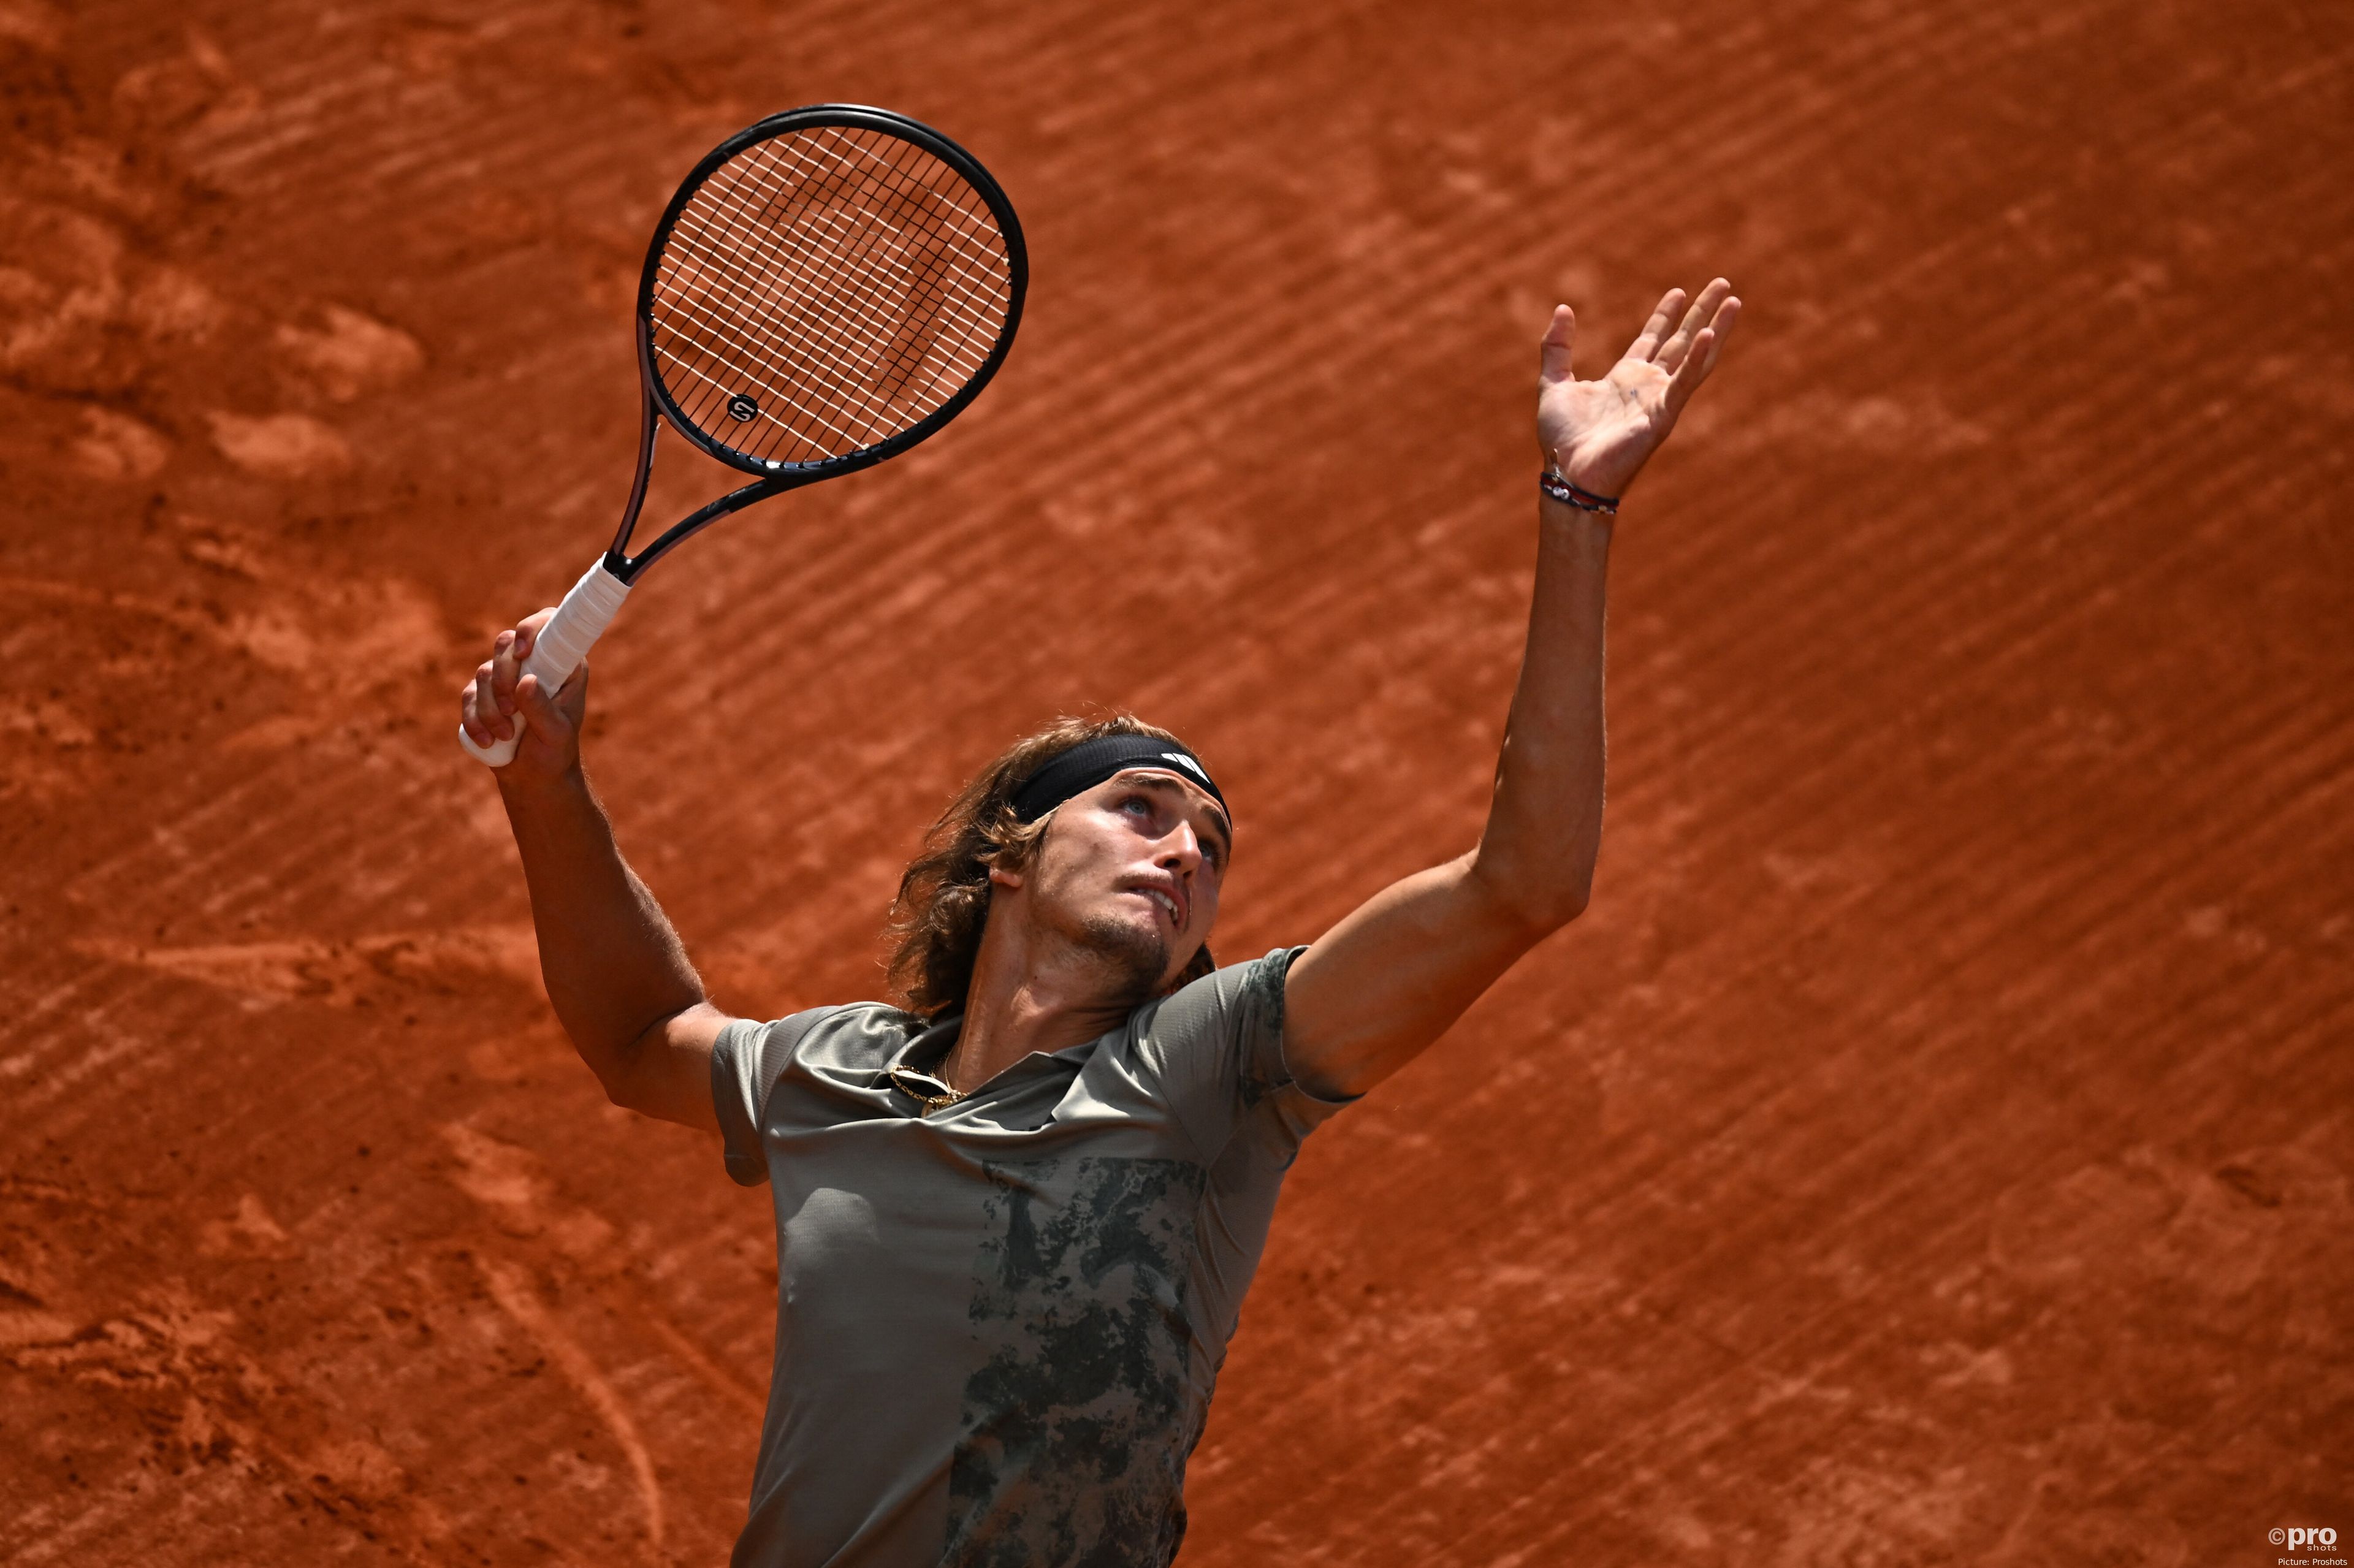 Zverev will play his&nbsp;8th Masters 1000 quarter-final